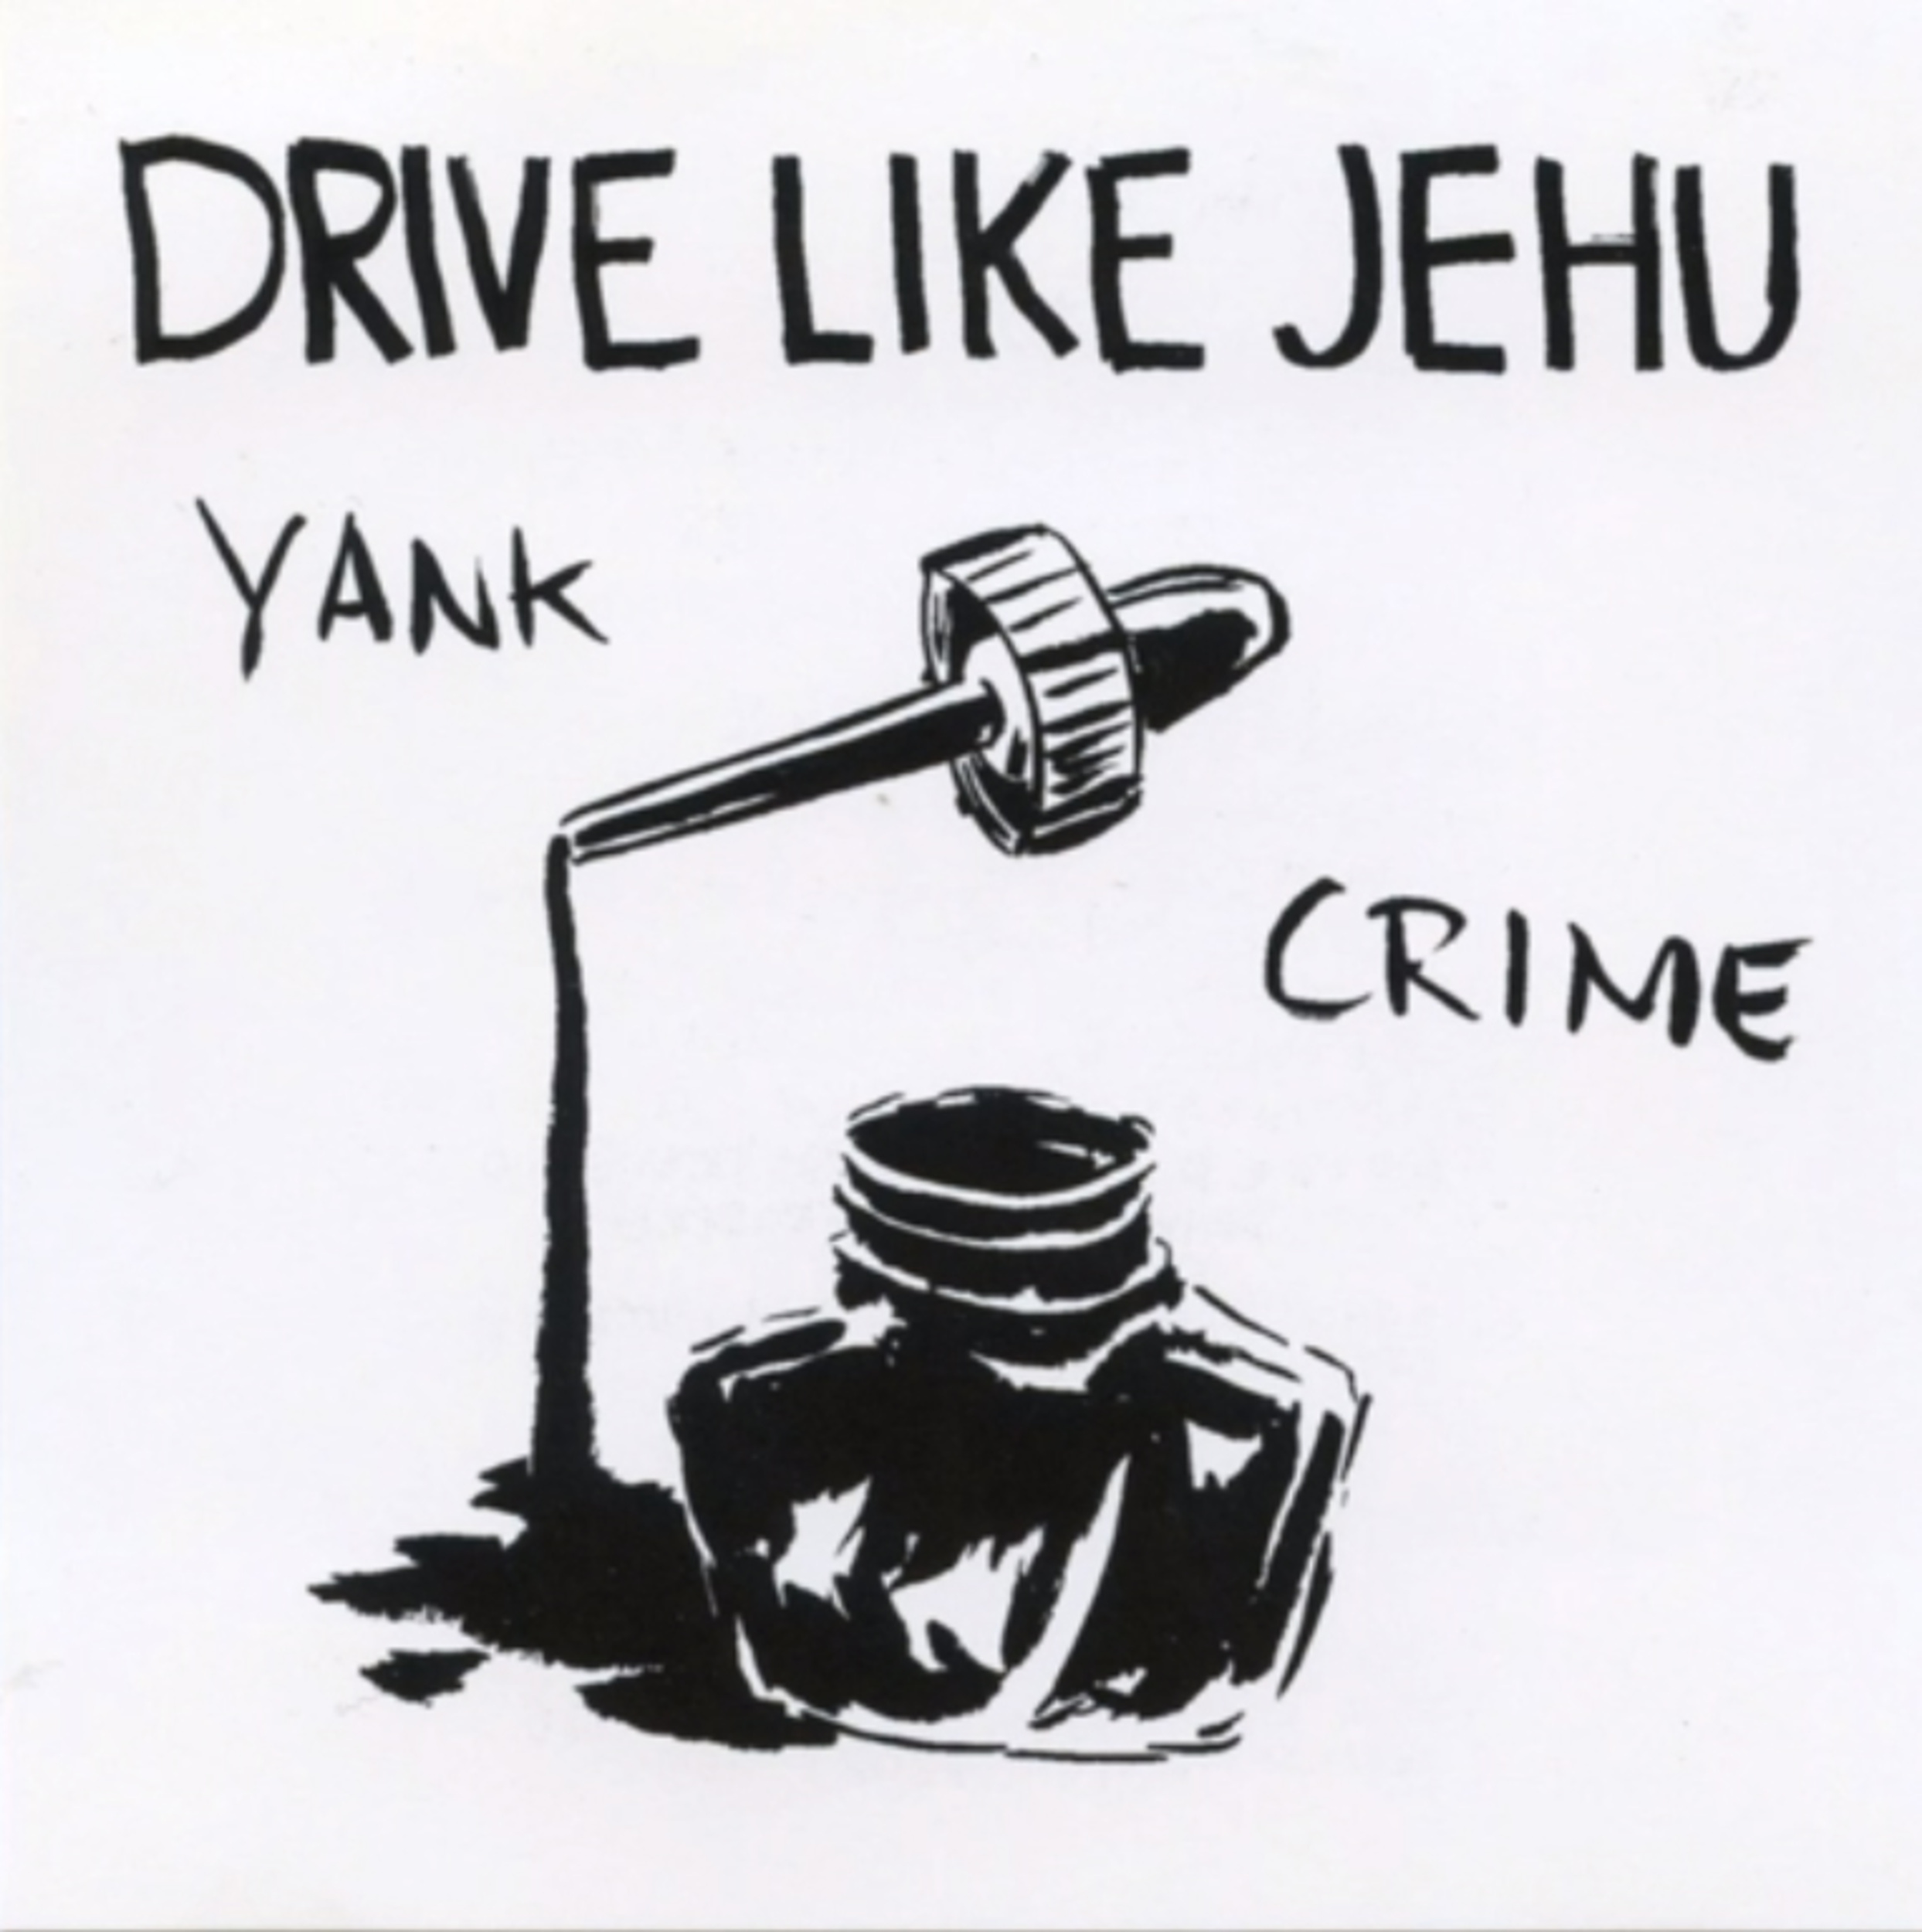 <p>San Diego's Drive Like Jehu signed with Interscope for their second (and final) album. <em>Yank Crime</em> exists at a crossroad where math-rock meets post hardcore, and the result is an abrasive yet listenable outing. While the album never took off in the mainstream, <em>Yank Crime</em> was heavily influential in the post-hardcore and emo scenes.</p><p><a href='https://www.msn.com/en-us/community/channel/vid-cj9pqbr0vn9in2b6ddcd8sfgpfq6x6utp44fssrv6mc2gtybw0us'>Follow us on MSN to see more of our exclusive entertainment content.</a></p>